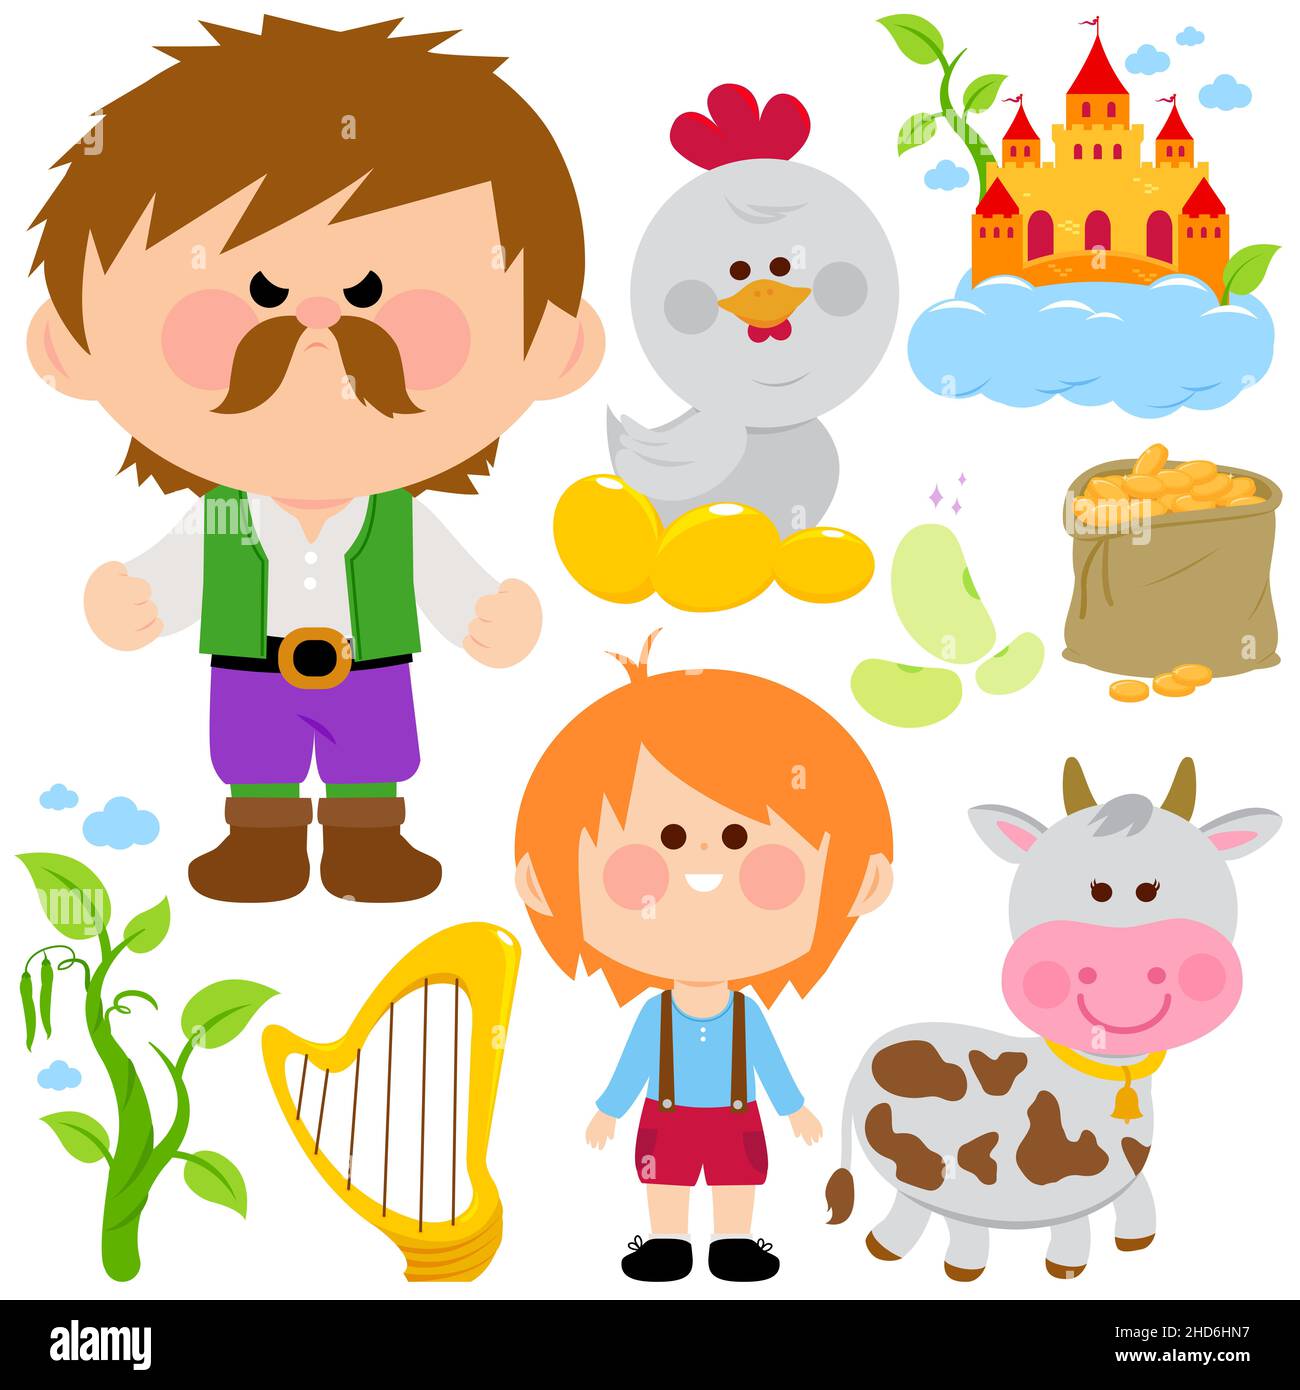 Jack and the magic beanstalk. Illustration collection. Stock Photo